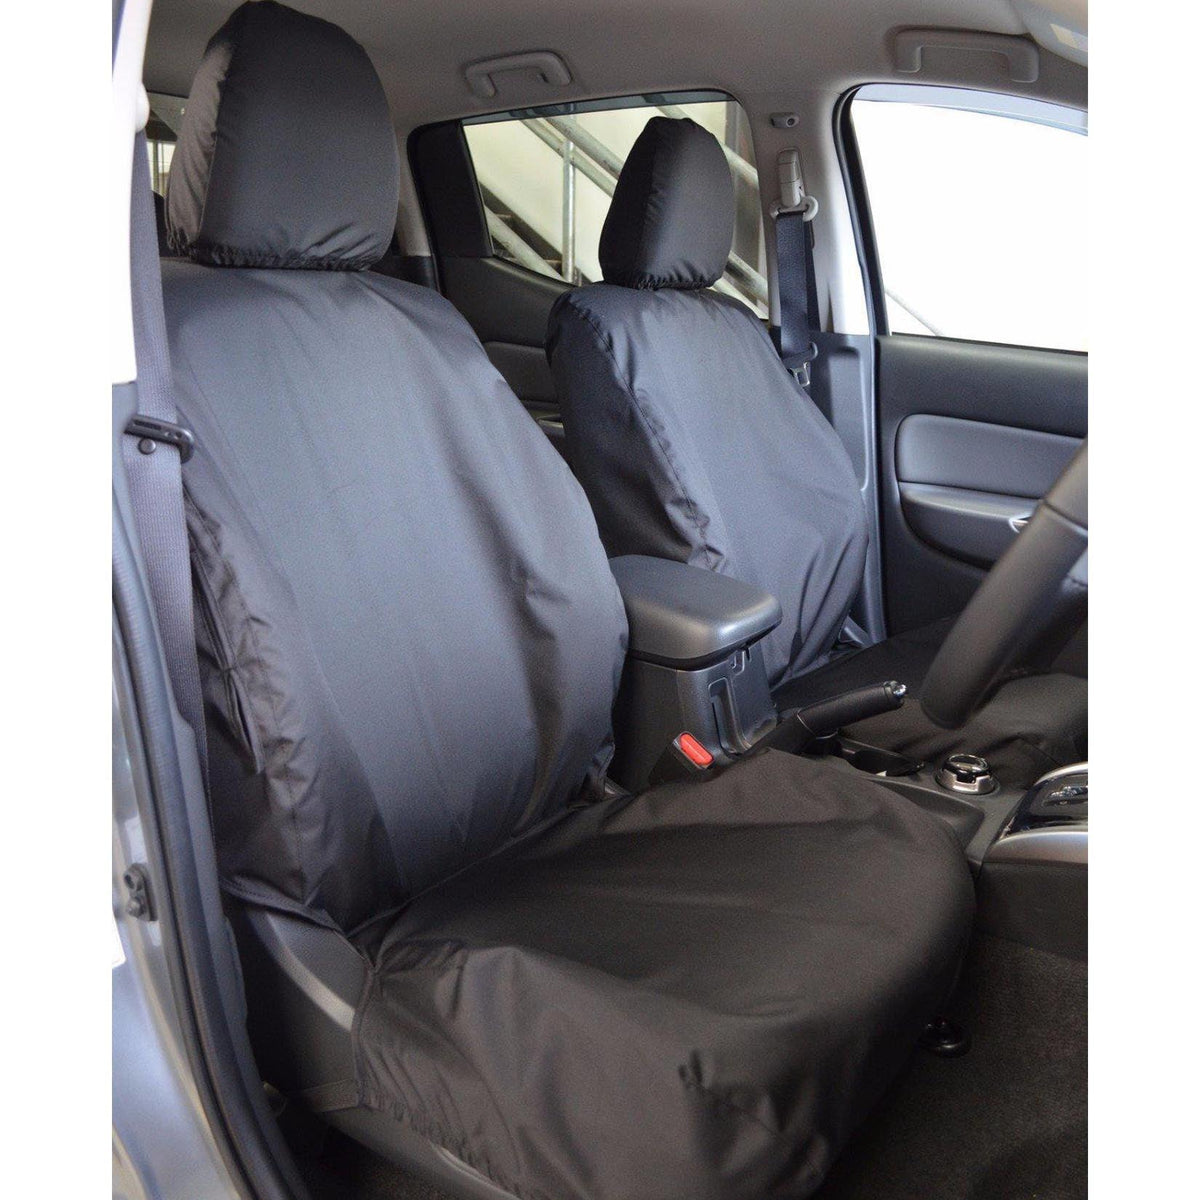 FIAT FULLBACK 2016 ON FRONT SEAT COVERS - PAIR - BLACK - Storm Xccessories2